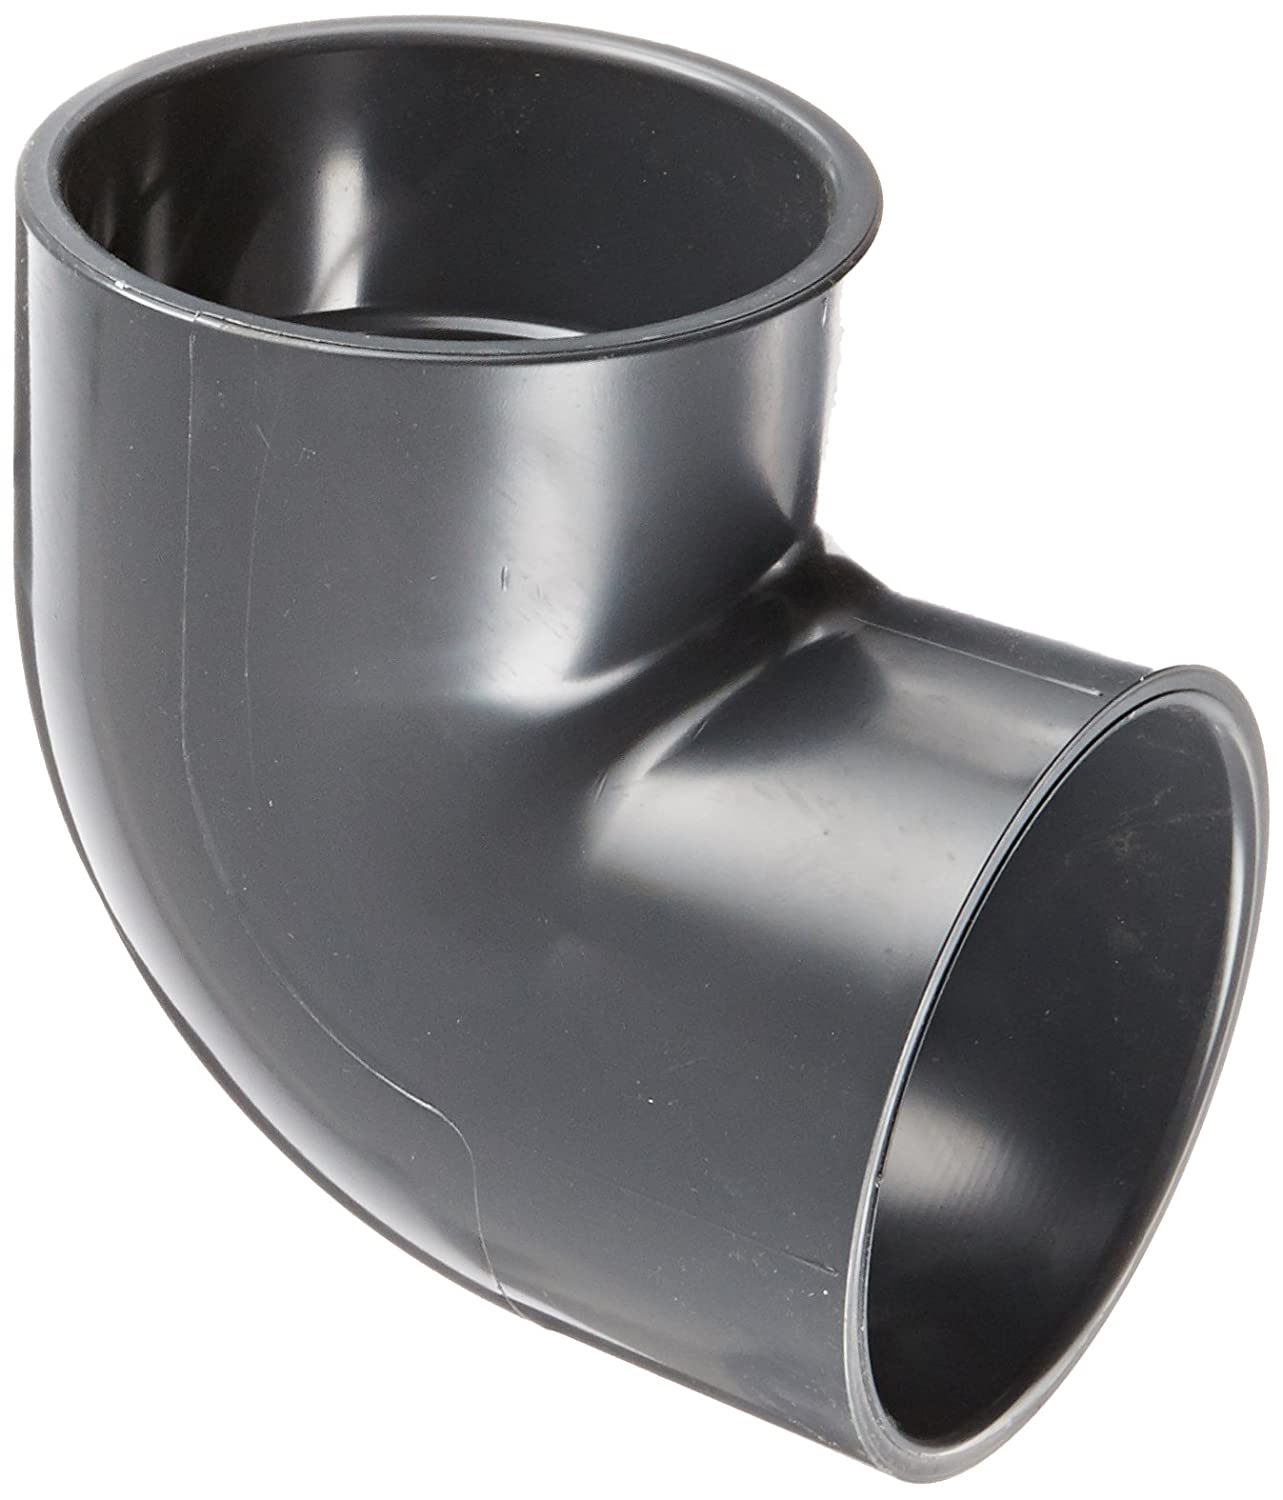 806-060 - PVC Pipe Fitting, 90 Degree Elbow, Schedule 80, 6" Socket